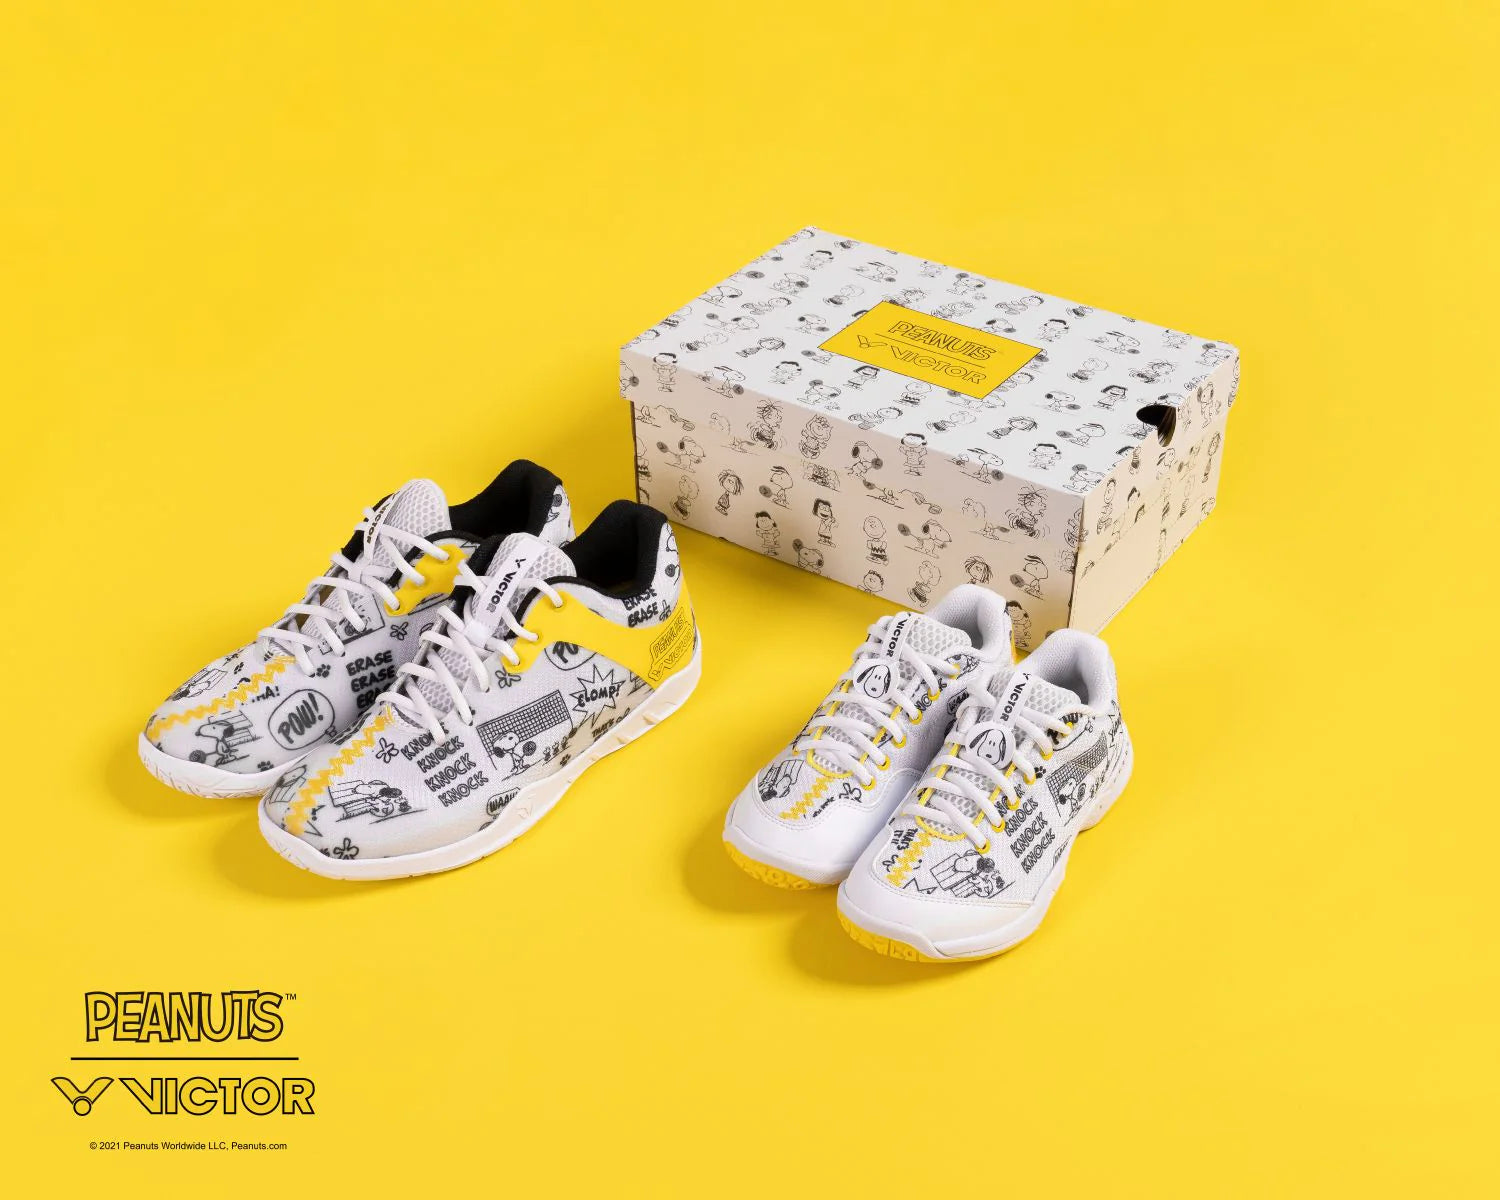 The Ultimate Guide to Snoopy Court Shoes: A Stylish and Innovative Badminton Footwear Collection